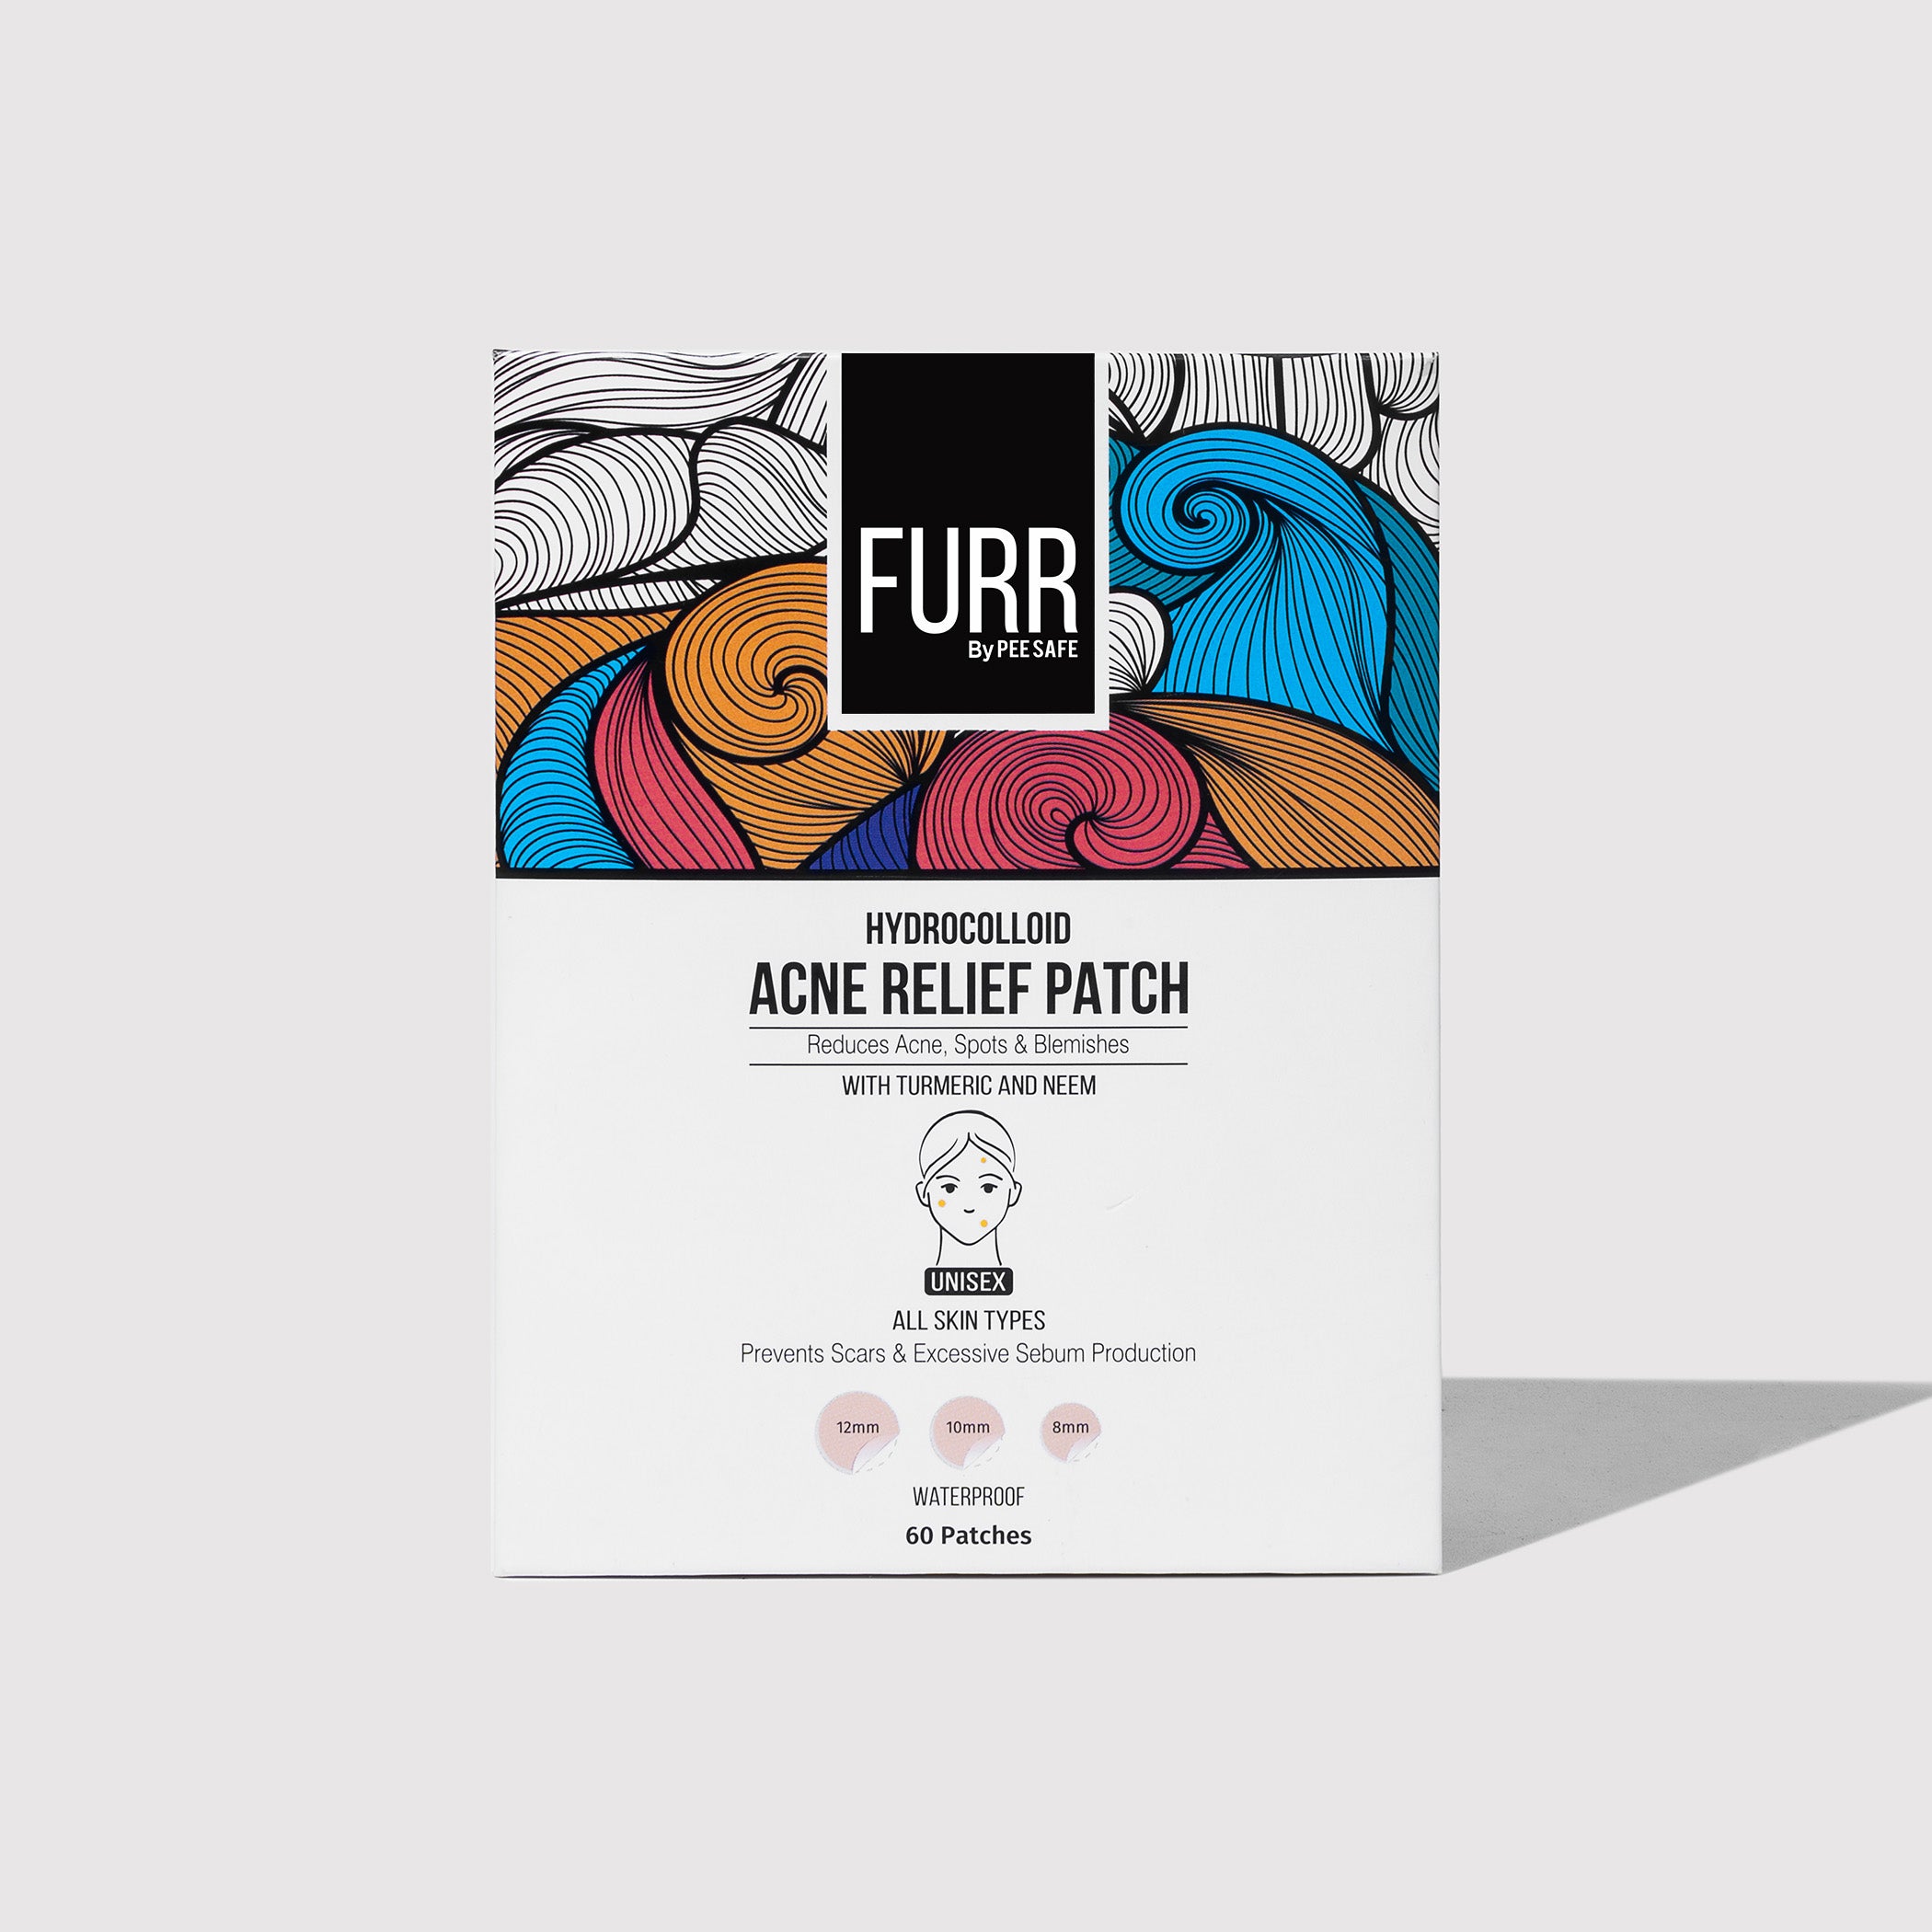 Furr Acne Relief Patches (60 Patches)